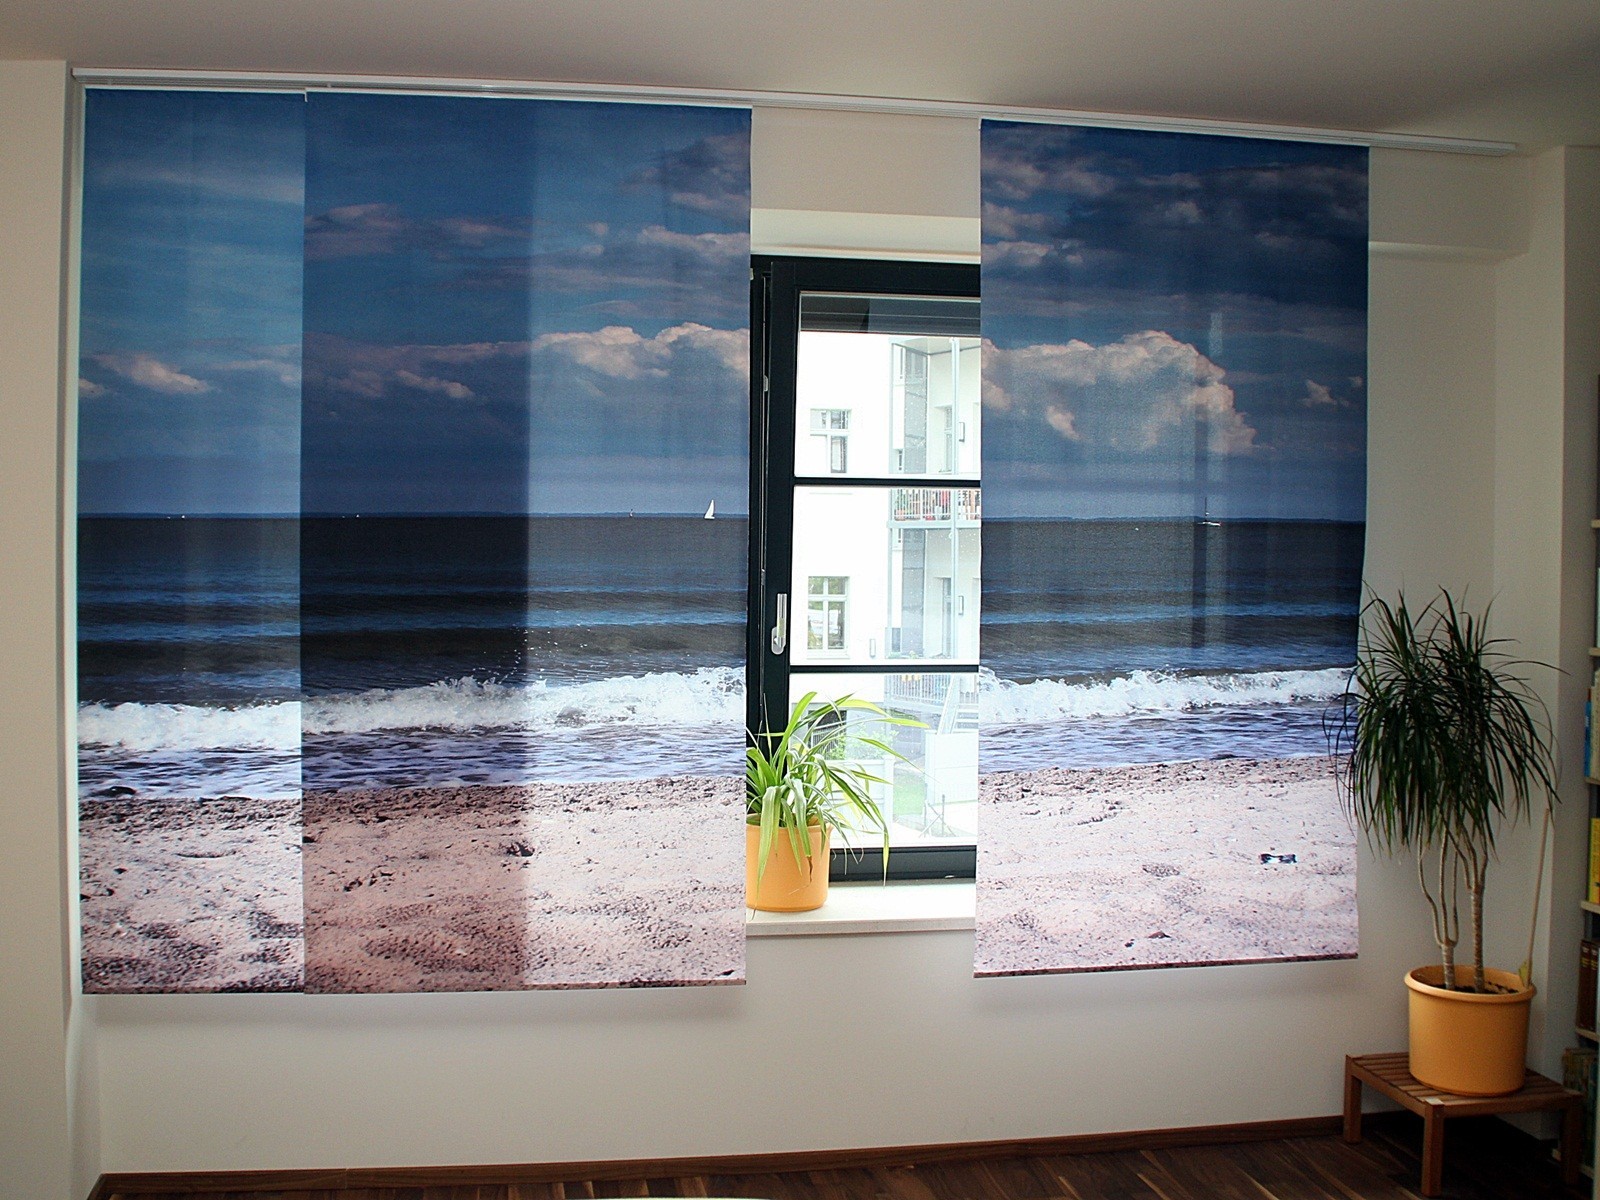 Printed curtains Photo sliding curtains Photo slats the best protection against privacy and glare